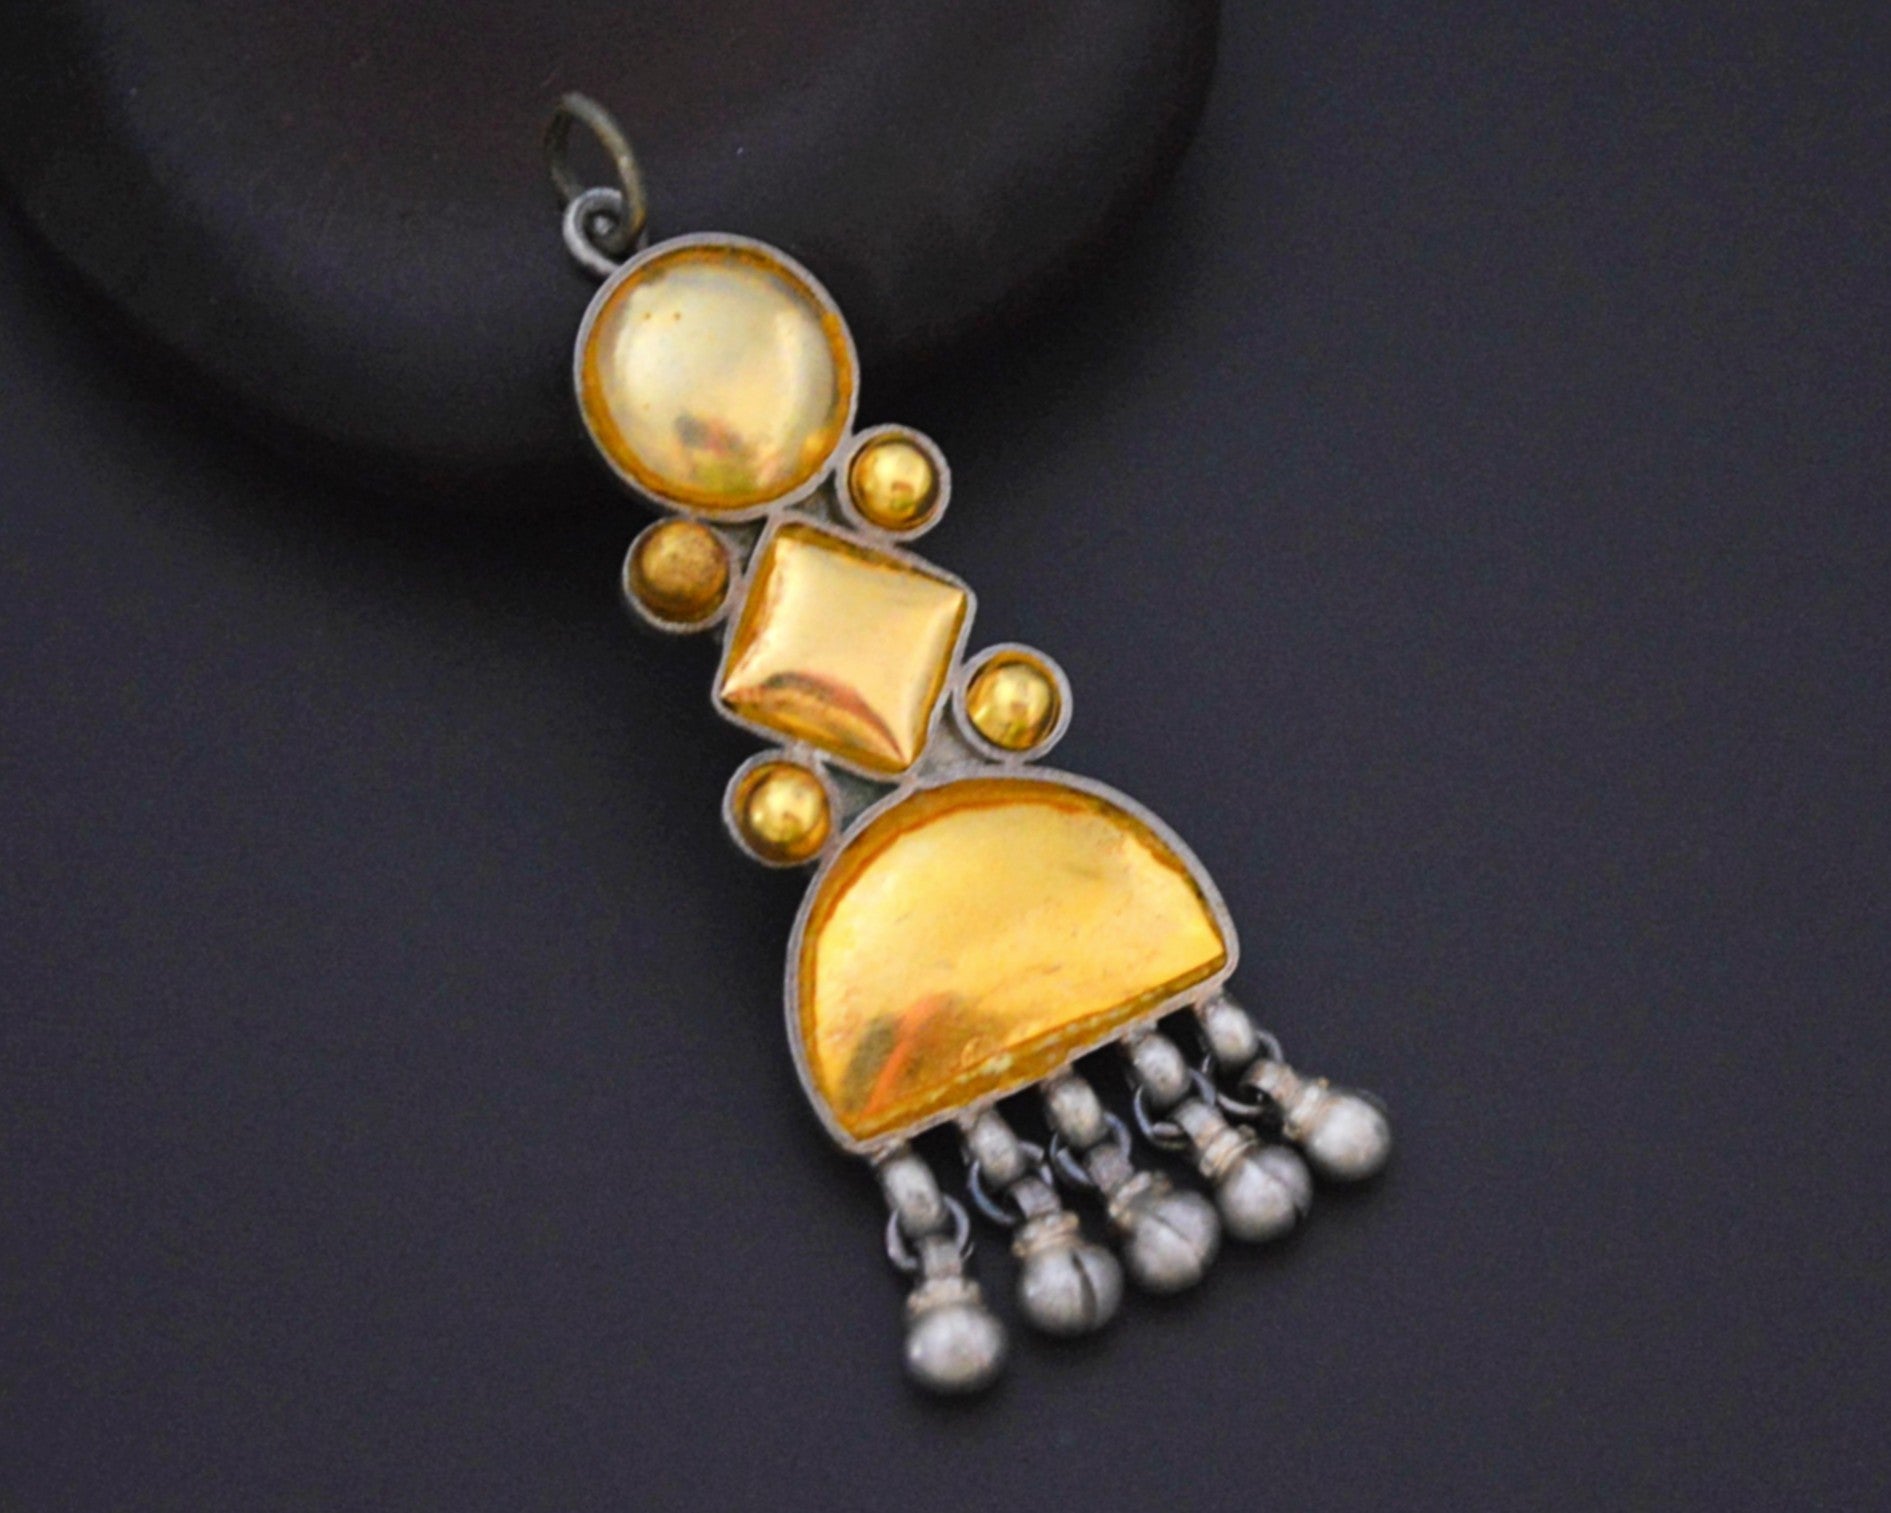 Rajasthani Silver Pendant with Gold Foil